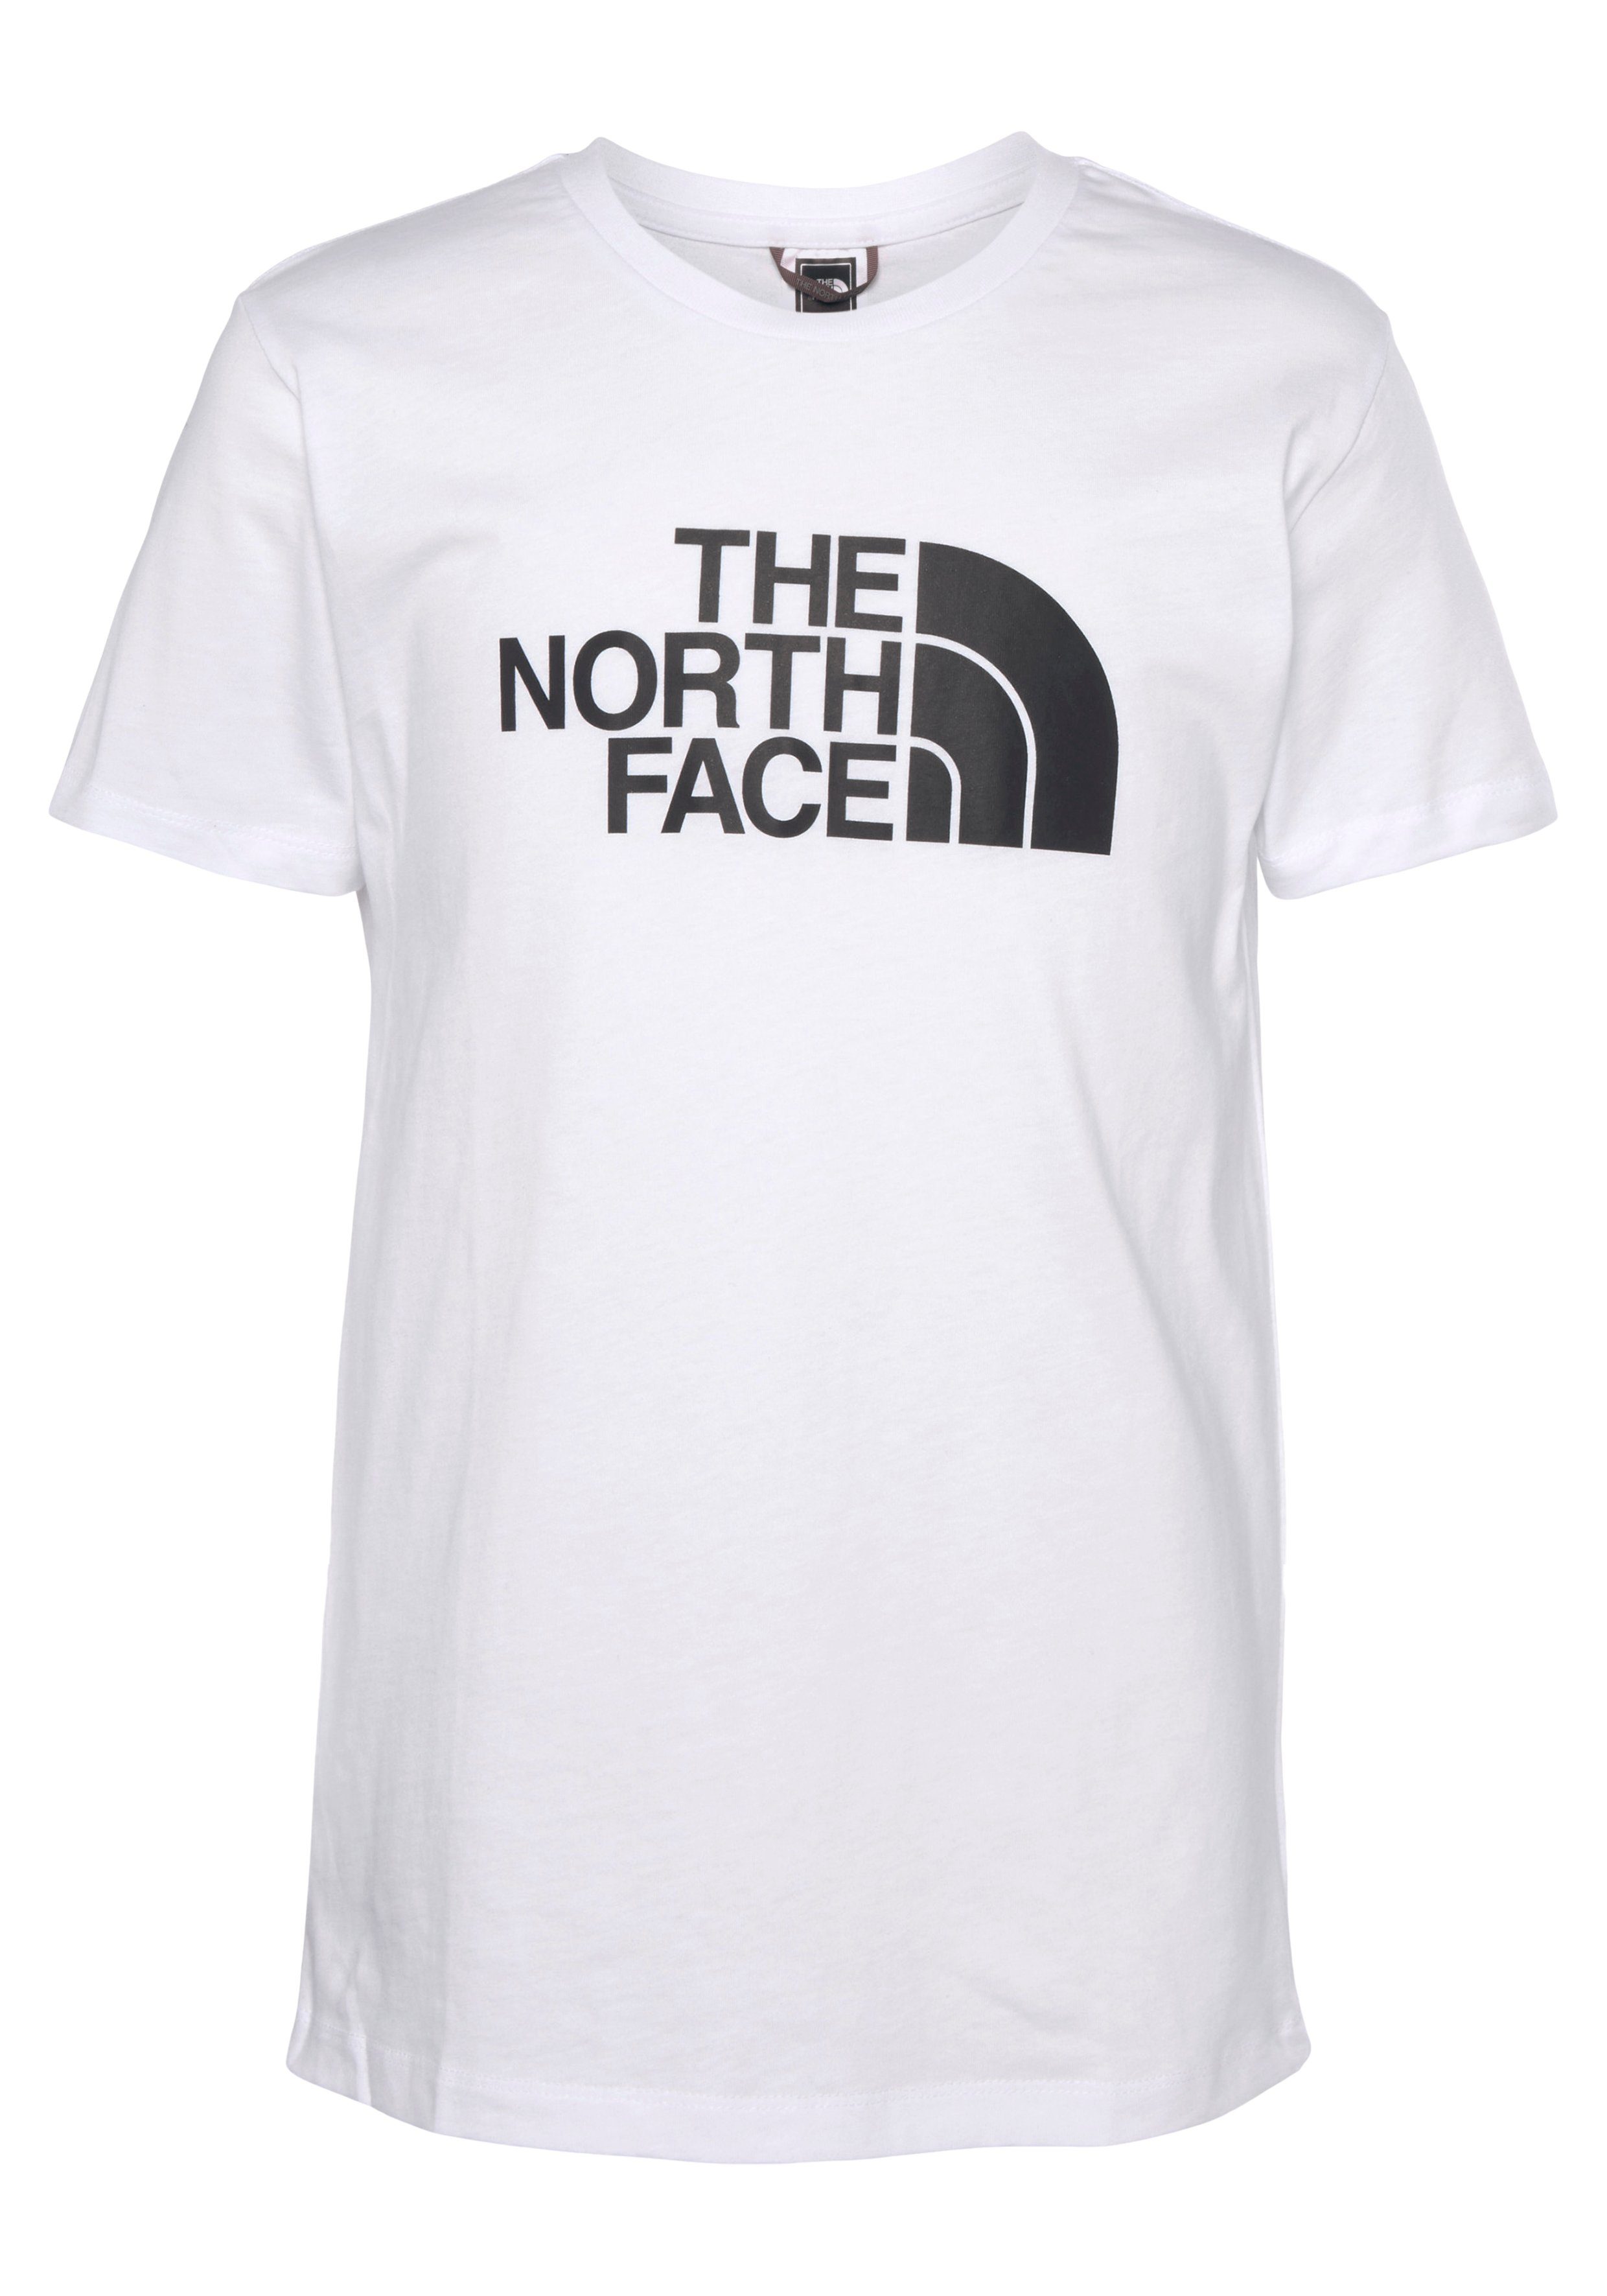 The North Face T-Shirt Kinder TEE für - white EASY